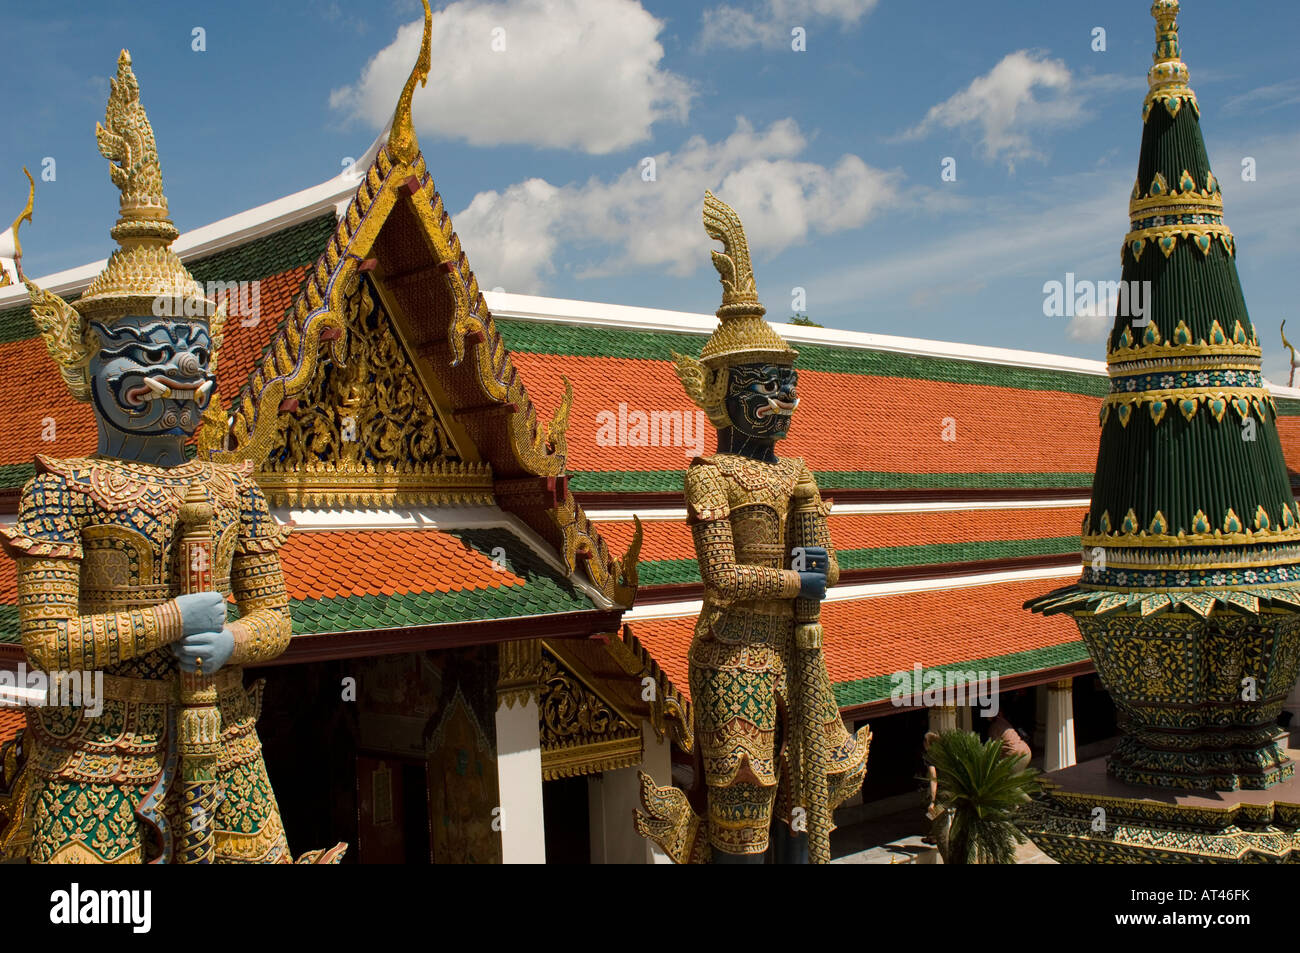 Large mythical beast statues guard the entrance to the Grand Palace Bangkok Thailand Stock Photo